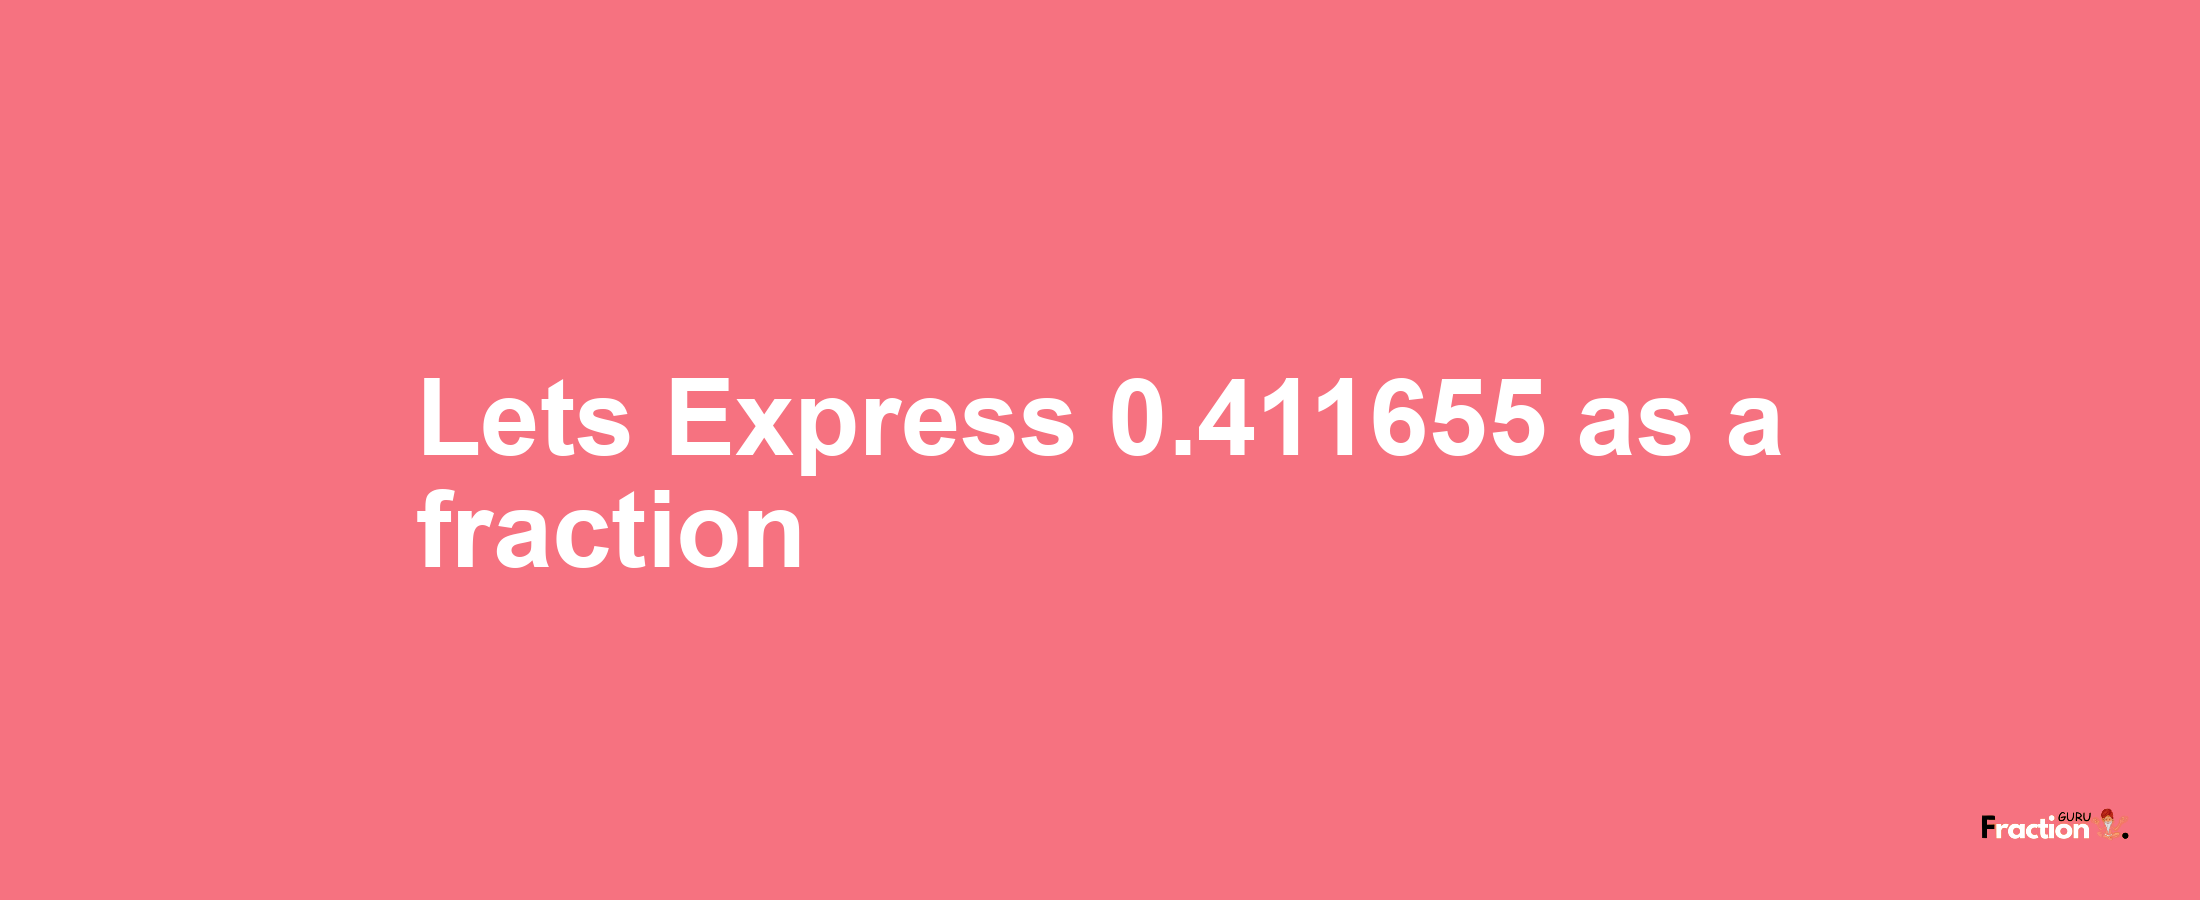 Lets Express 0.411655 as afraction